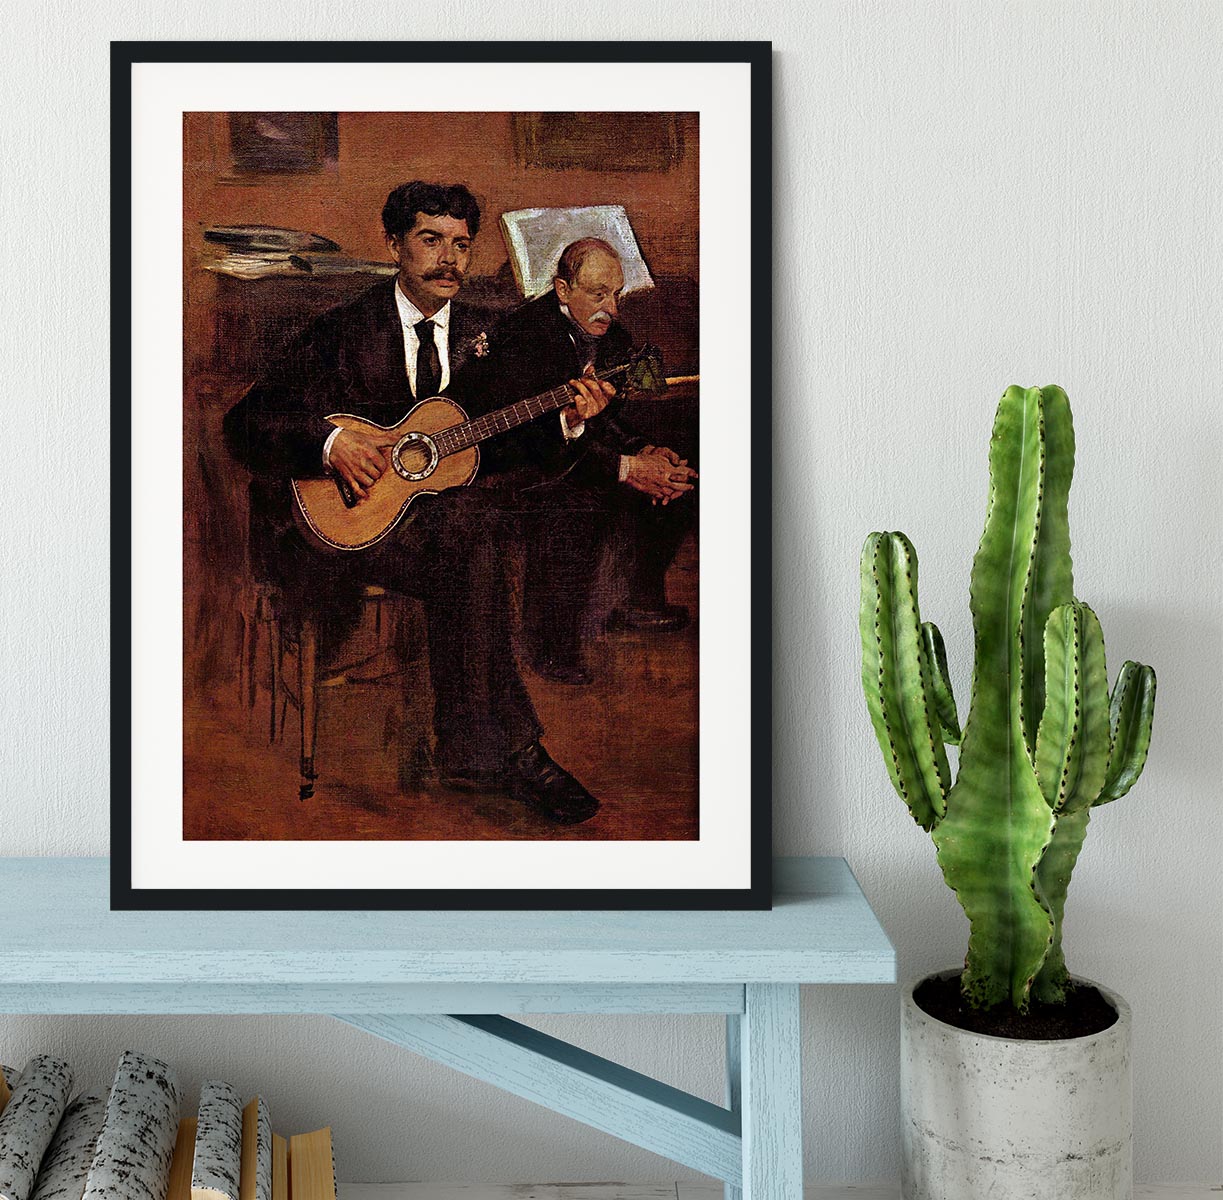 The guitarist Pagans and Monsieur Degas by Manet Framed Print - Canvas Art Rocks - 1